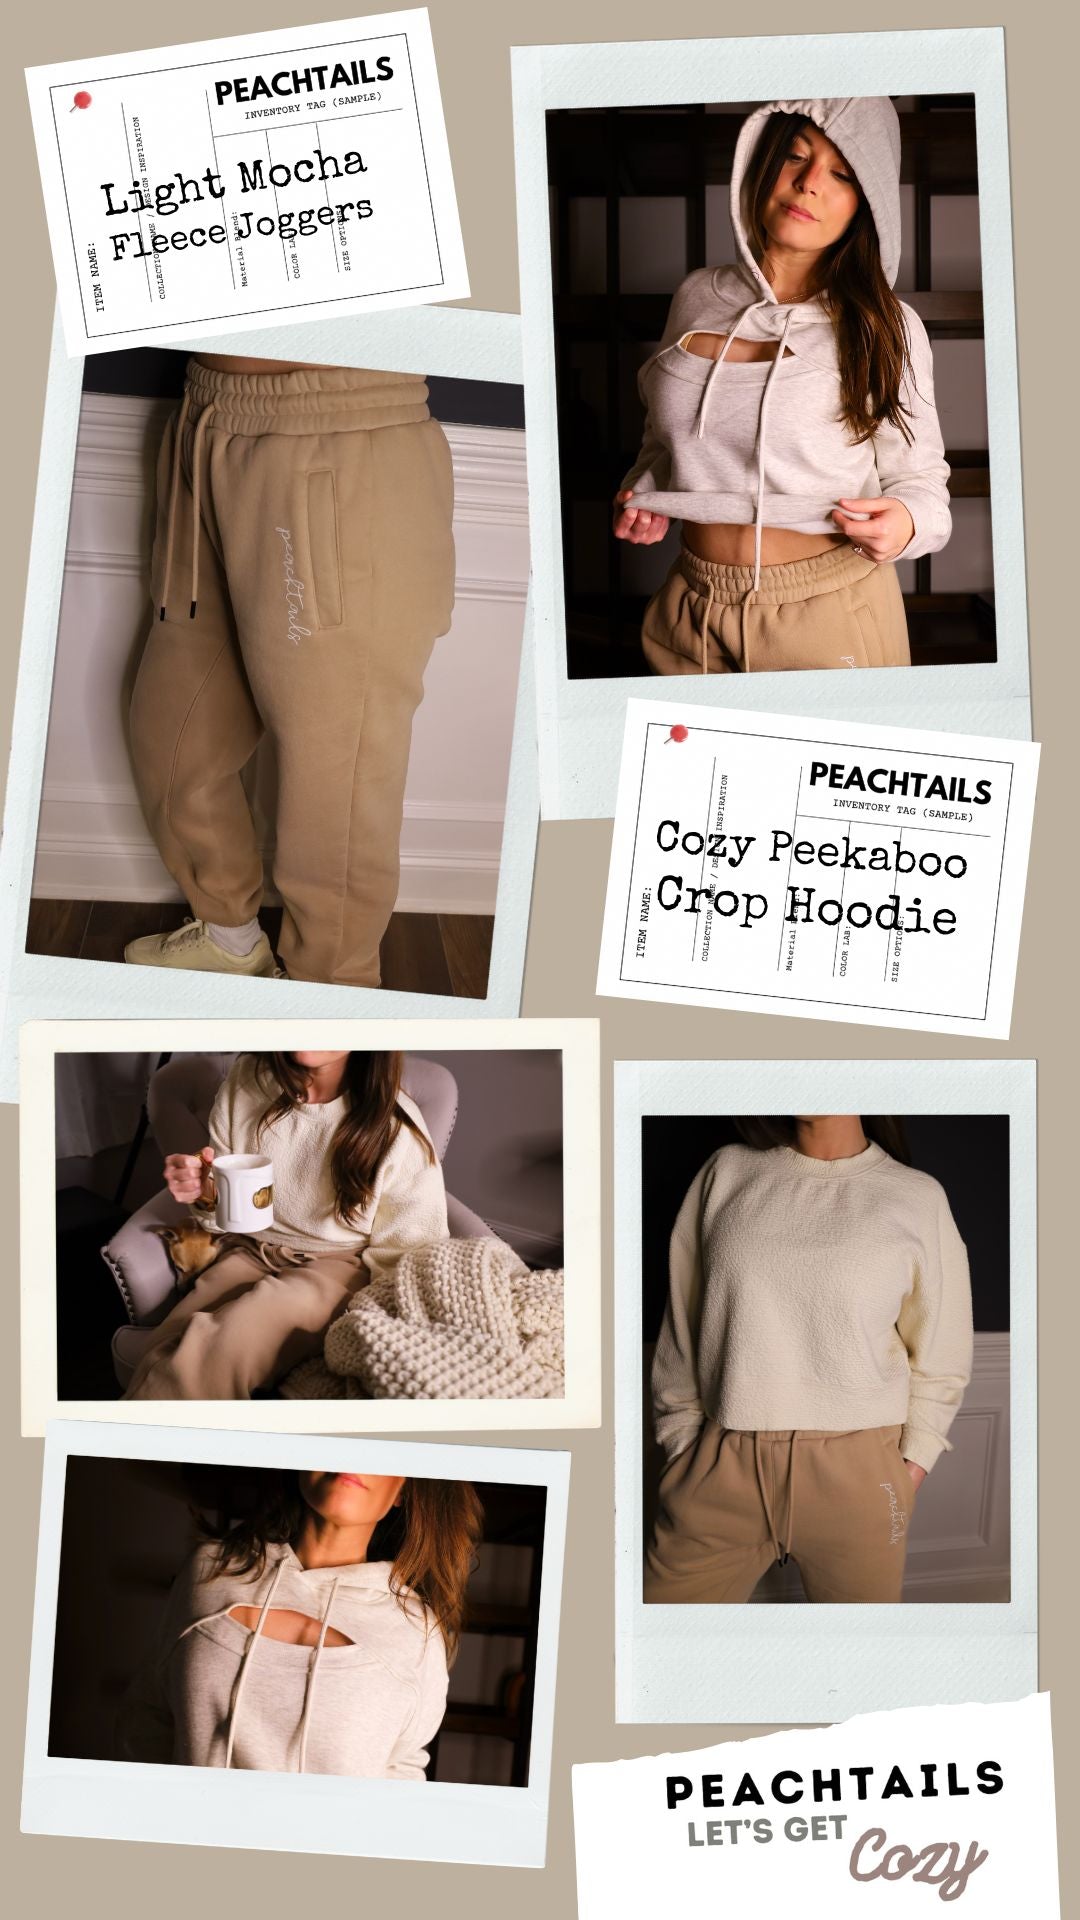 The image is a collage showcasing PEACHTAILS clothing. It features "Light Mocha Fleece Joggers" and a "Cozy Peekaboo Crop Hoodie." The collage includes a woman wearing the joggers and hoodie, exuding a relaxed and comfortable style. Another photo shows a woman in a cozy setting with a knit blanket, reinforcing the comfortable theme. At the bottom, the PEACHTAILS logo is followed by the slogan "LET'S GET Cozy," uniting the images into a cohesive and inviting loungewear promotion.